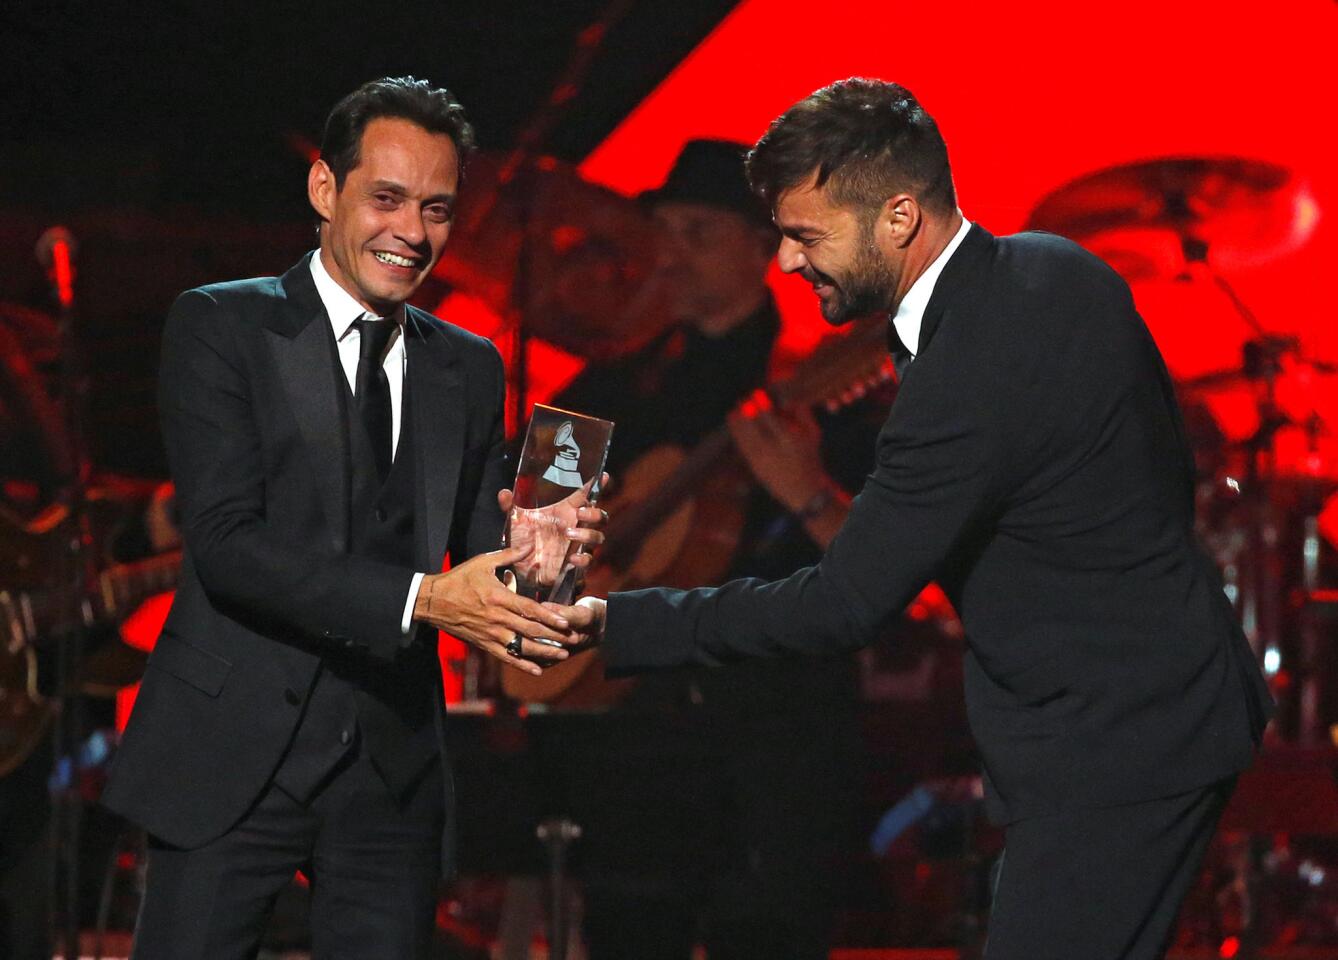 Singer Martin presents recording artist Anthony with the Latin Recording Academy Person of the Year award in Las Vegas